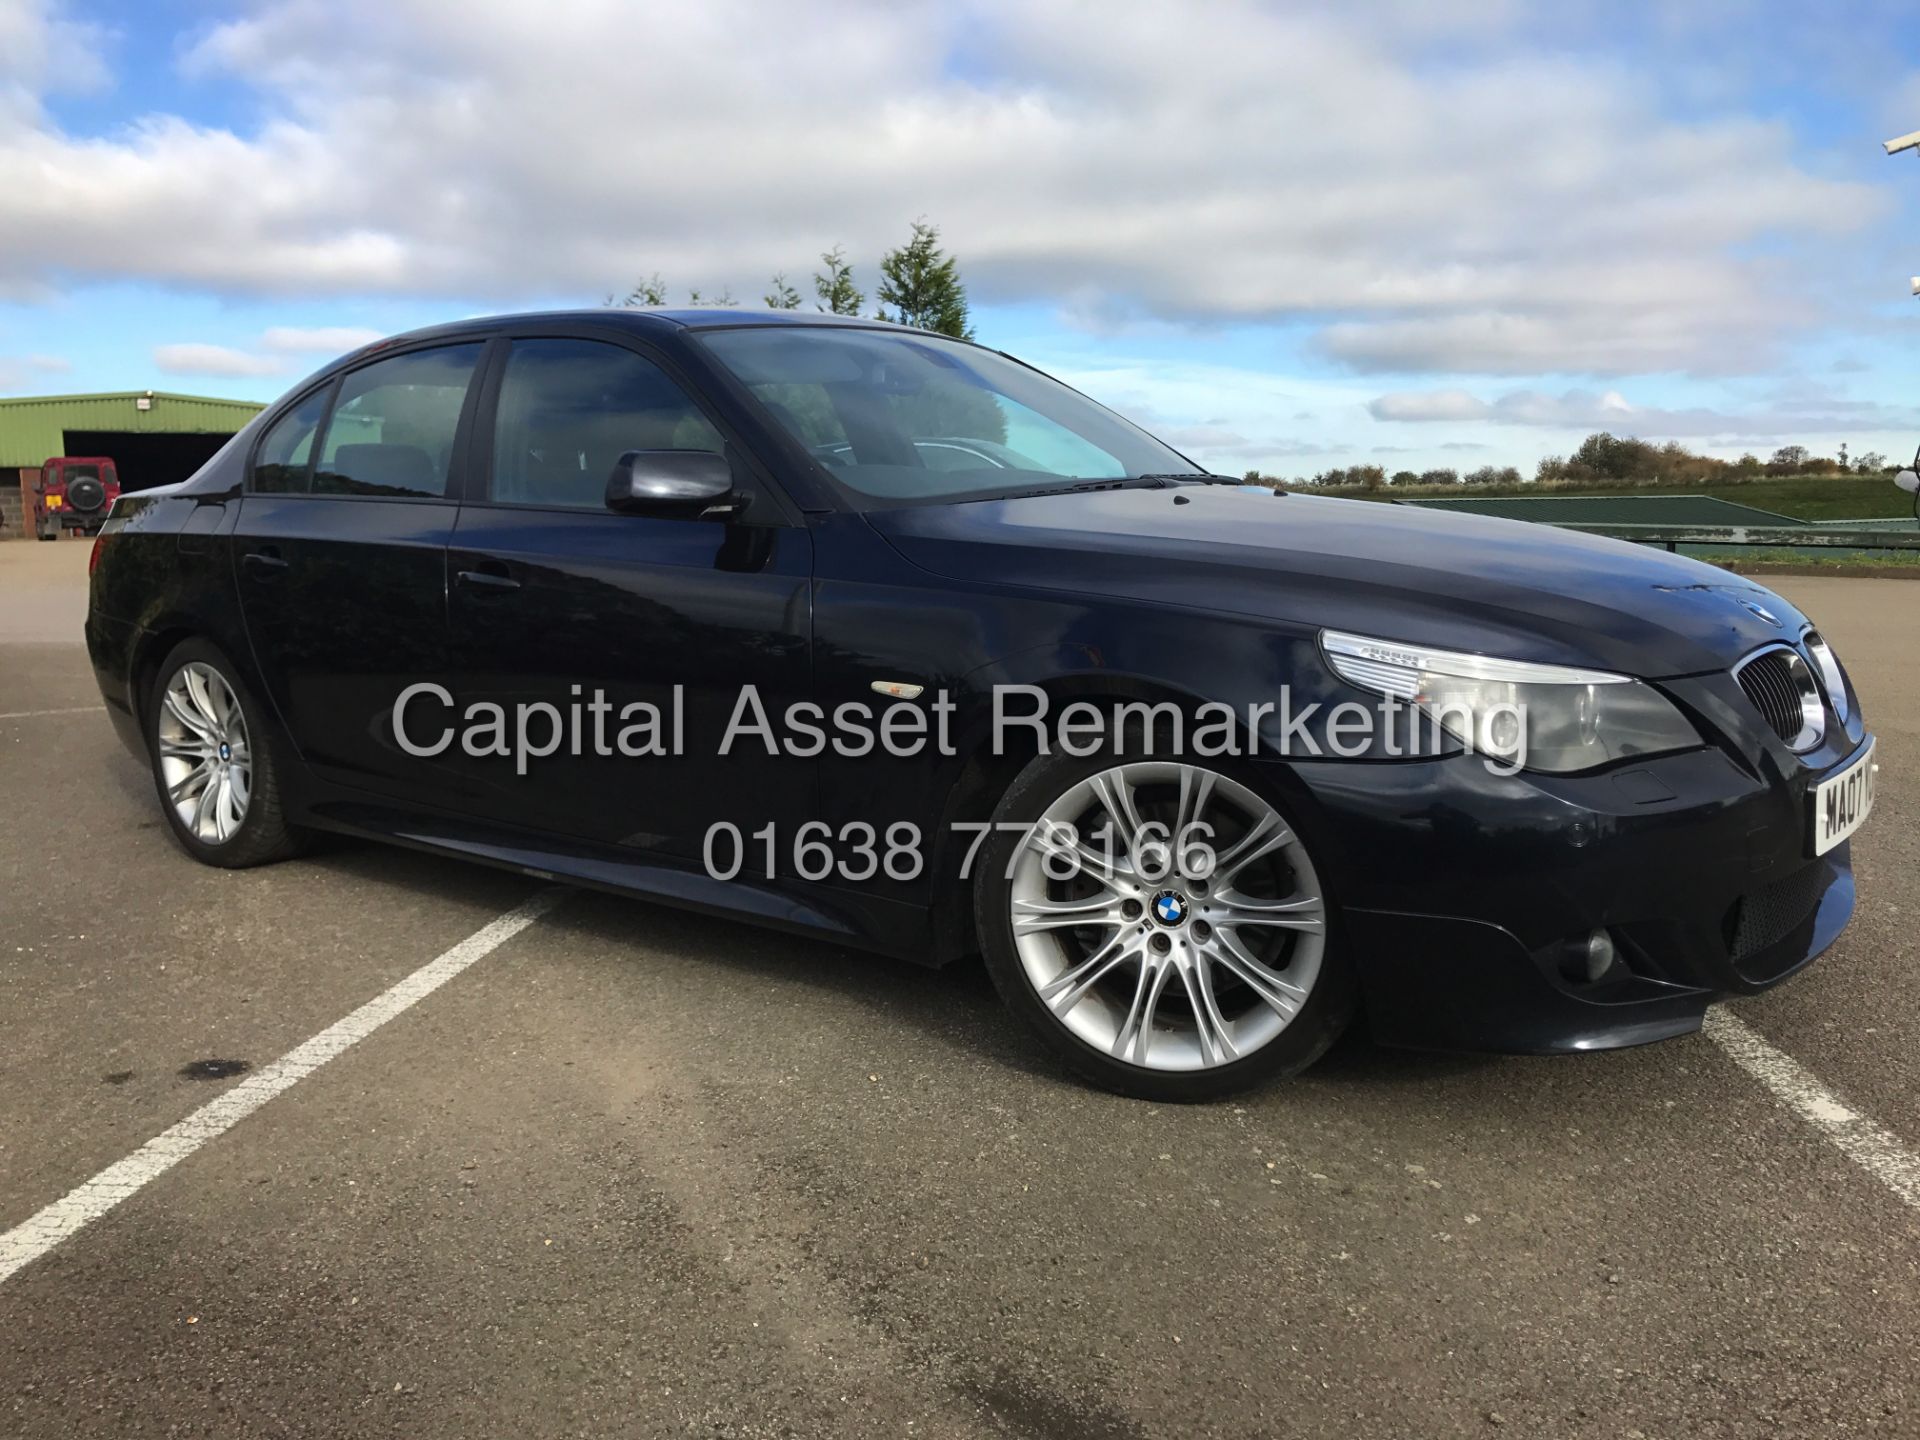 On Sale BMW 530D "M-SPORT" AUTO - FULL LEATHER -AIR CON -CRUISE CNTROL "GENUINE M-SPORT" NO VAT - Image 8 of 14